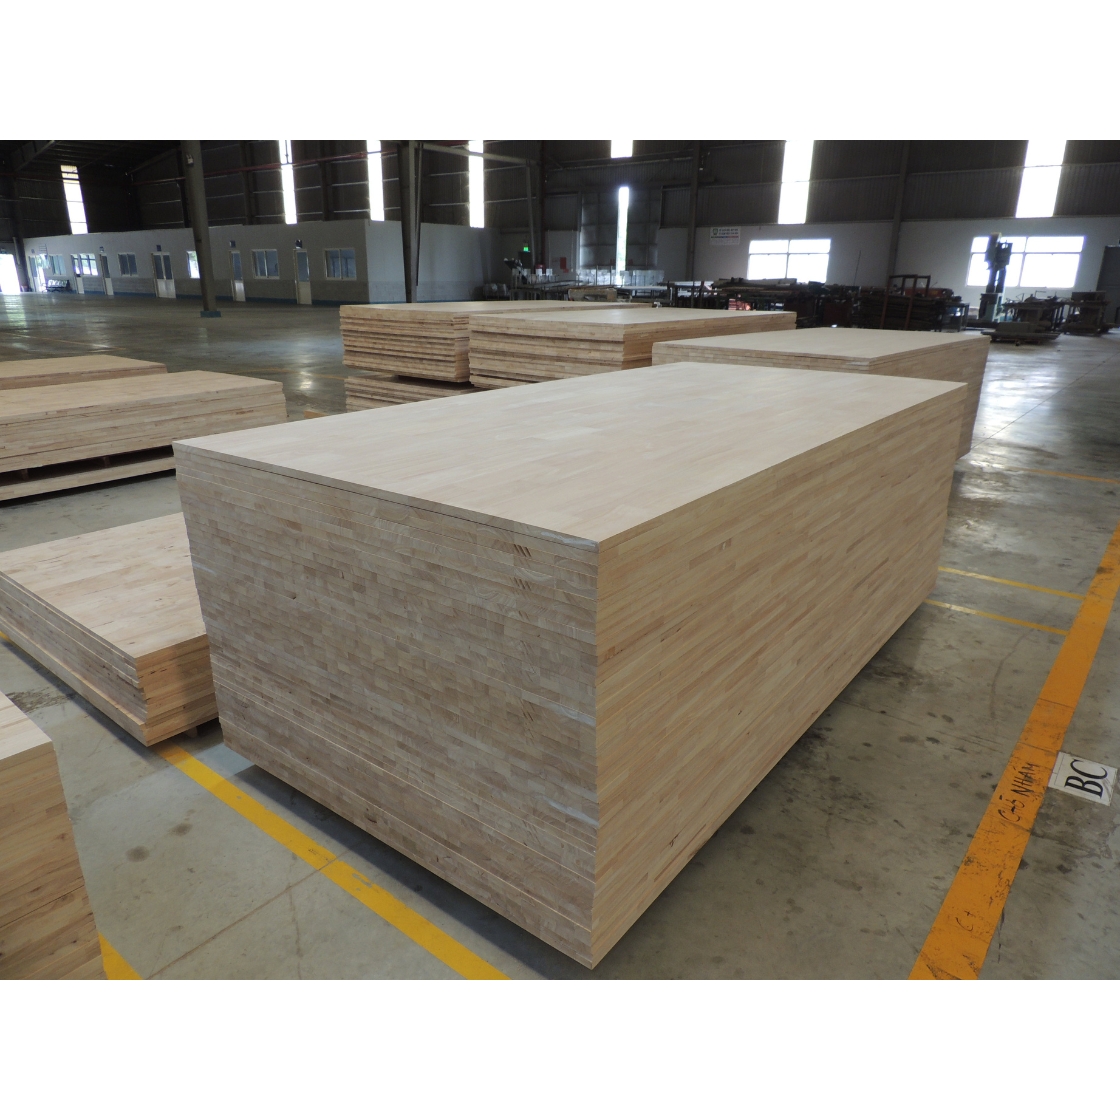 Rubber Wood Professional Team Rubber Wood Indoor Furniture Fsc-Coc Customized Packaging Made In Vietnam Manufacturer 4